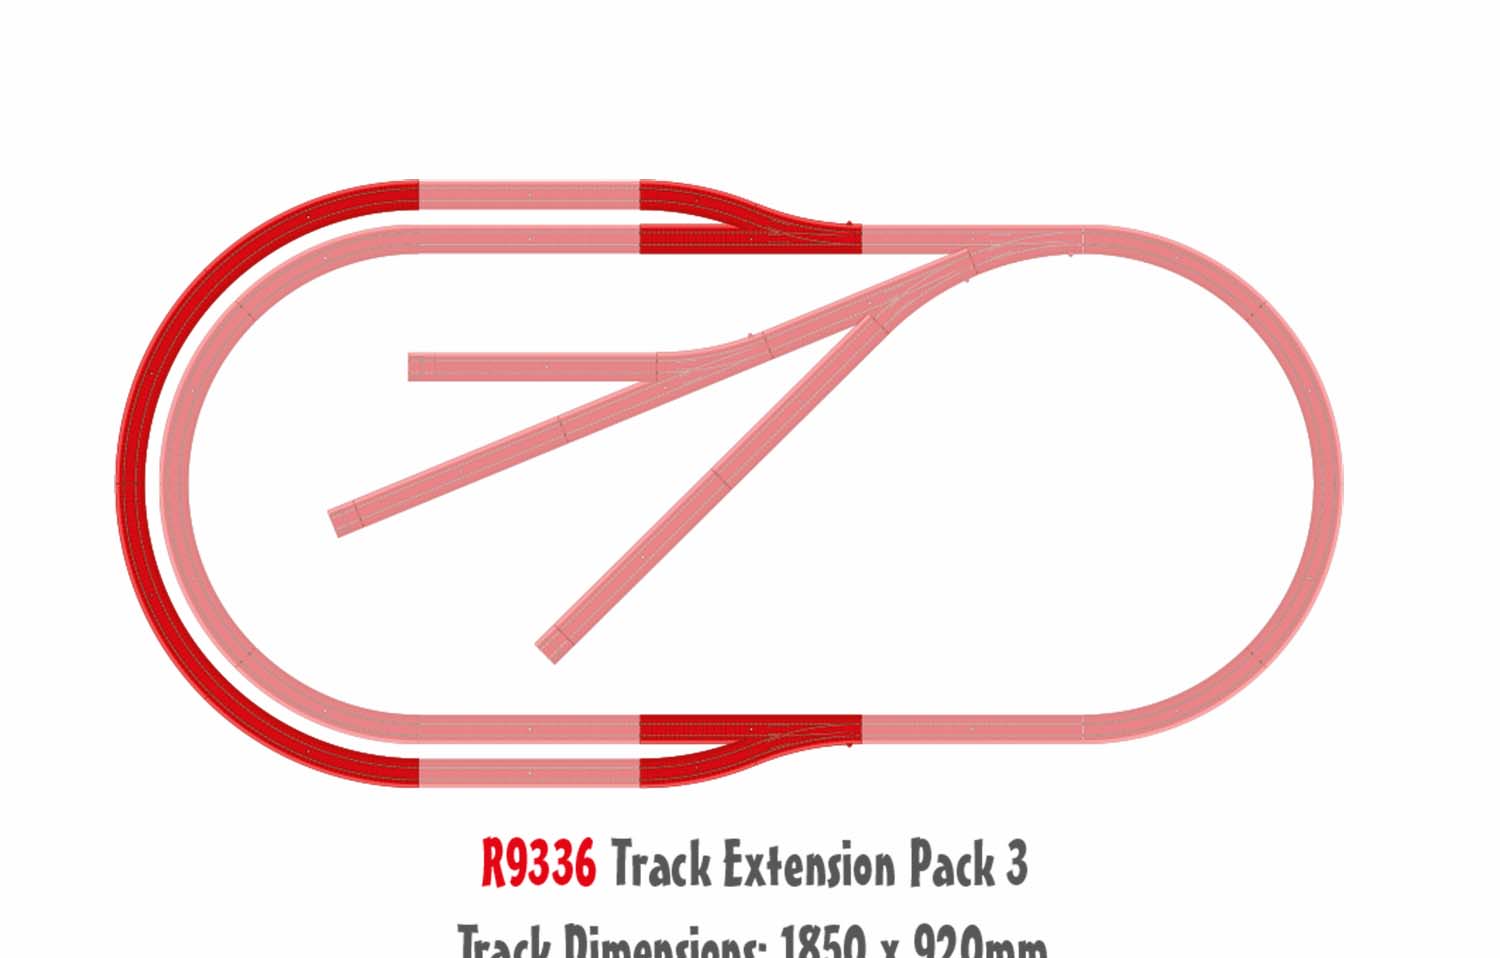 Playtrains Track Extension Pack 3 R9336